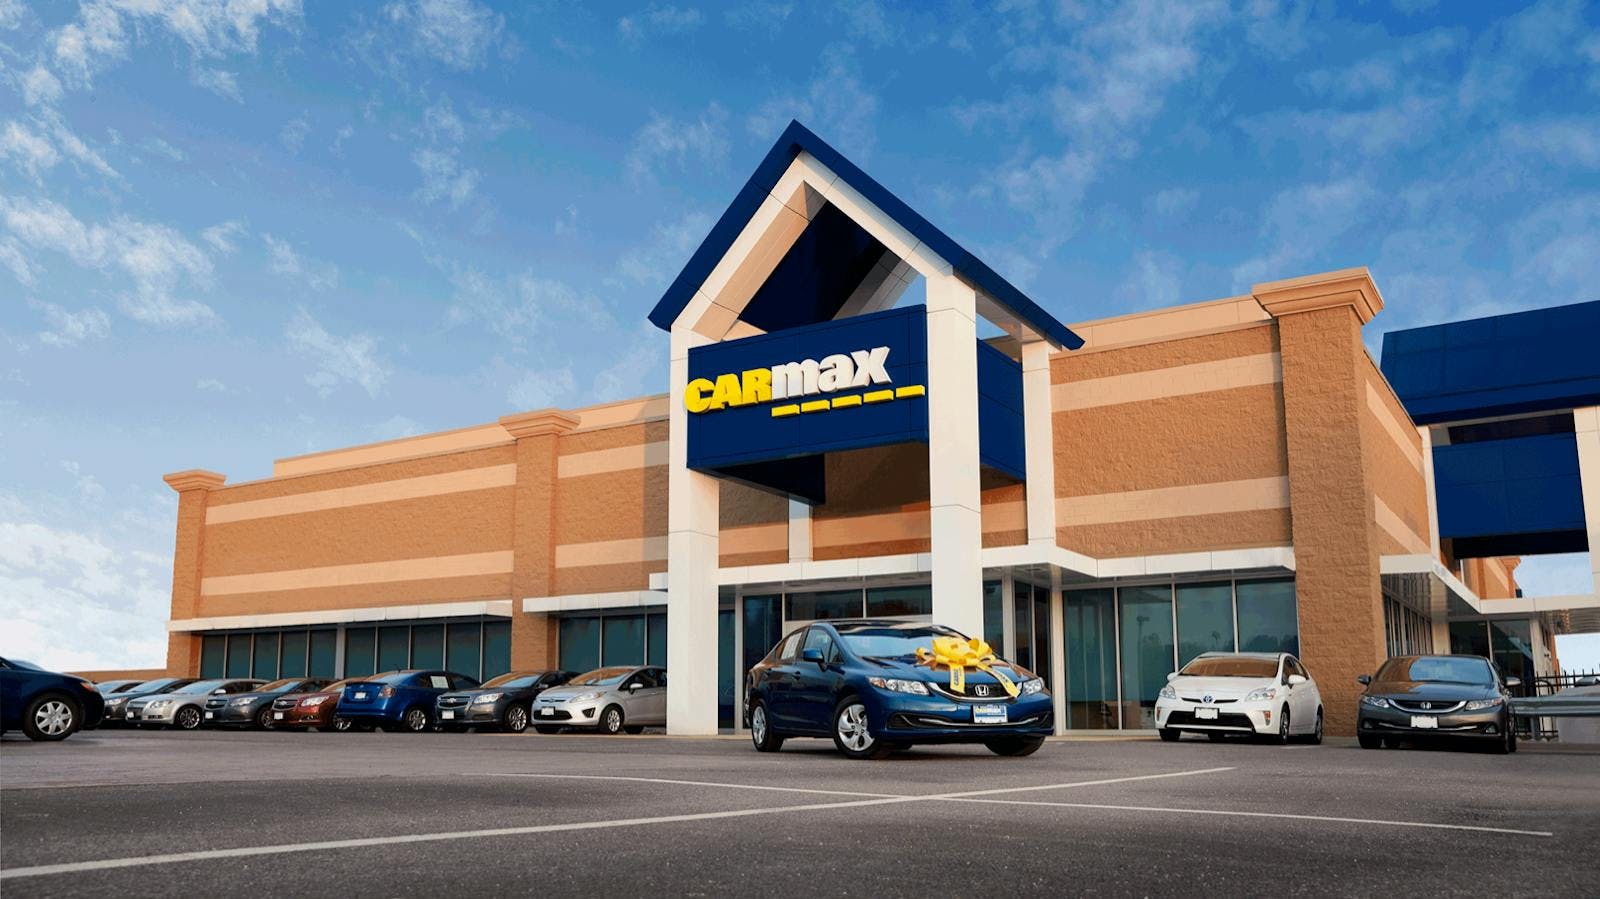 Front of the CarMax dealership building